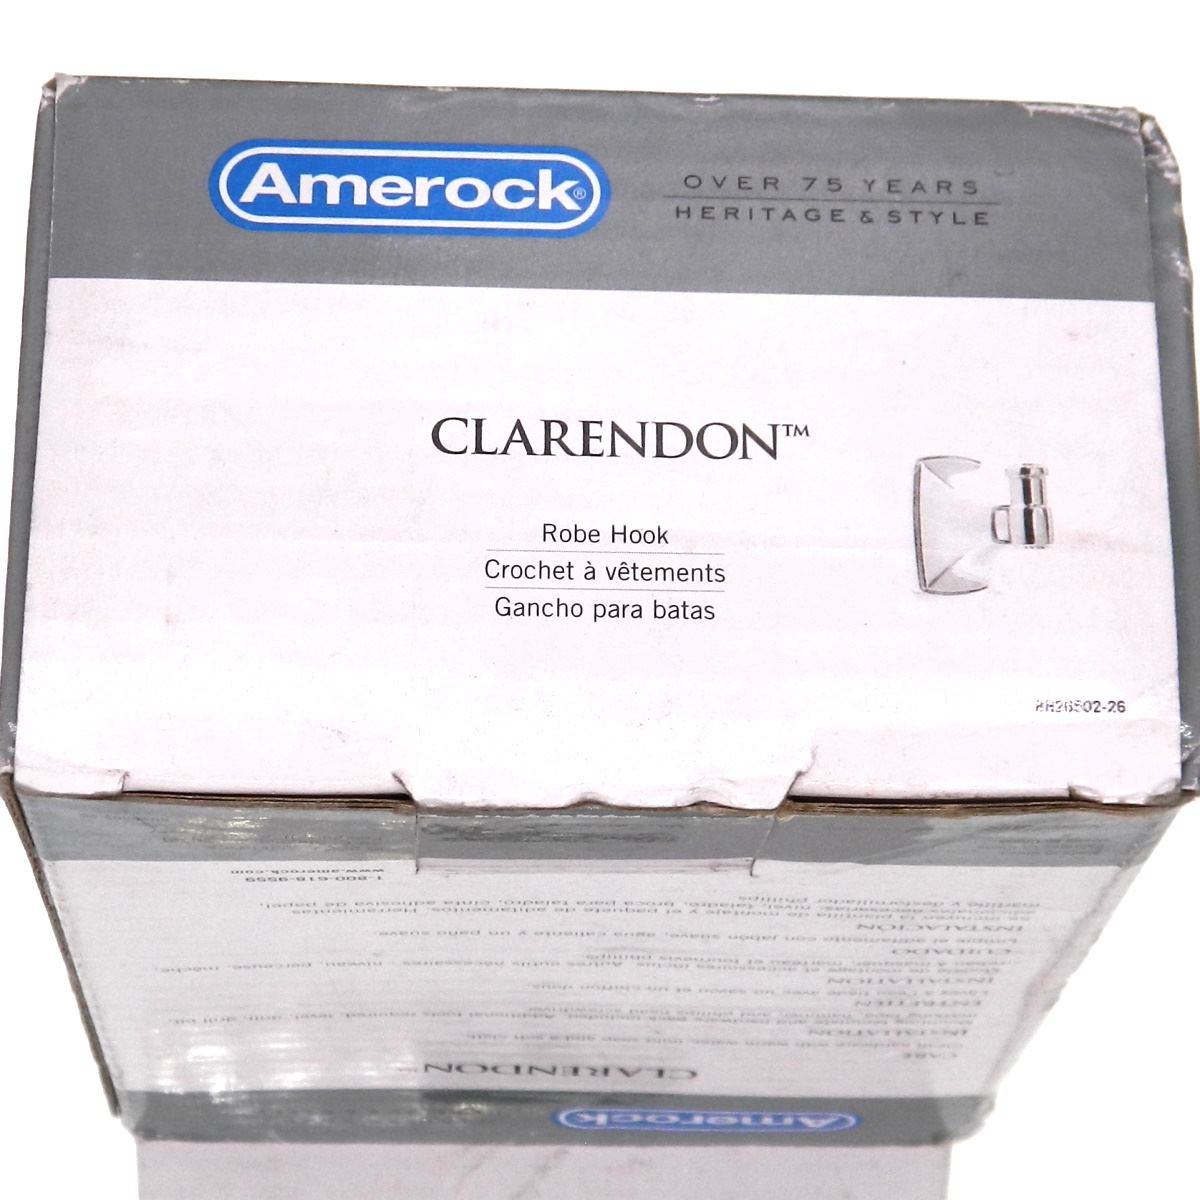 Amerock Clarendon Polished Chrome Coat or Robe Hook Wall Mounted BH26502-26